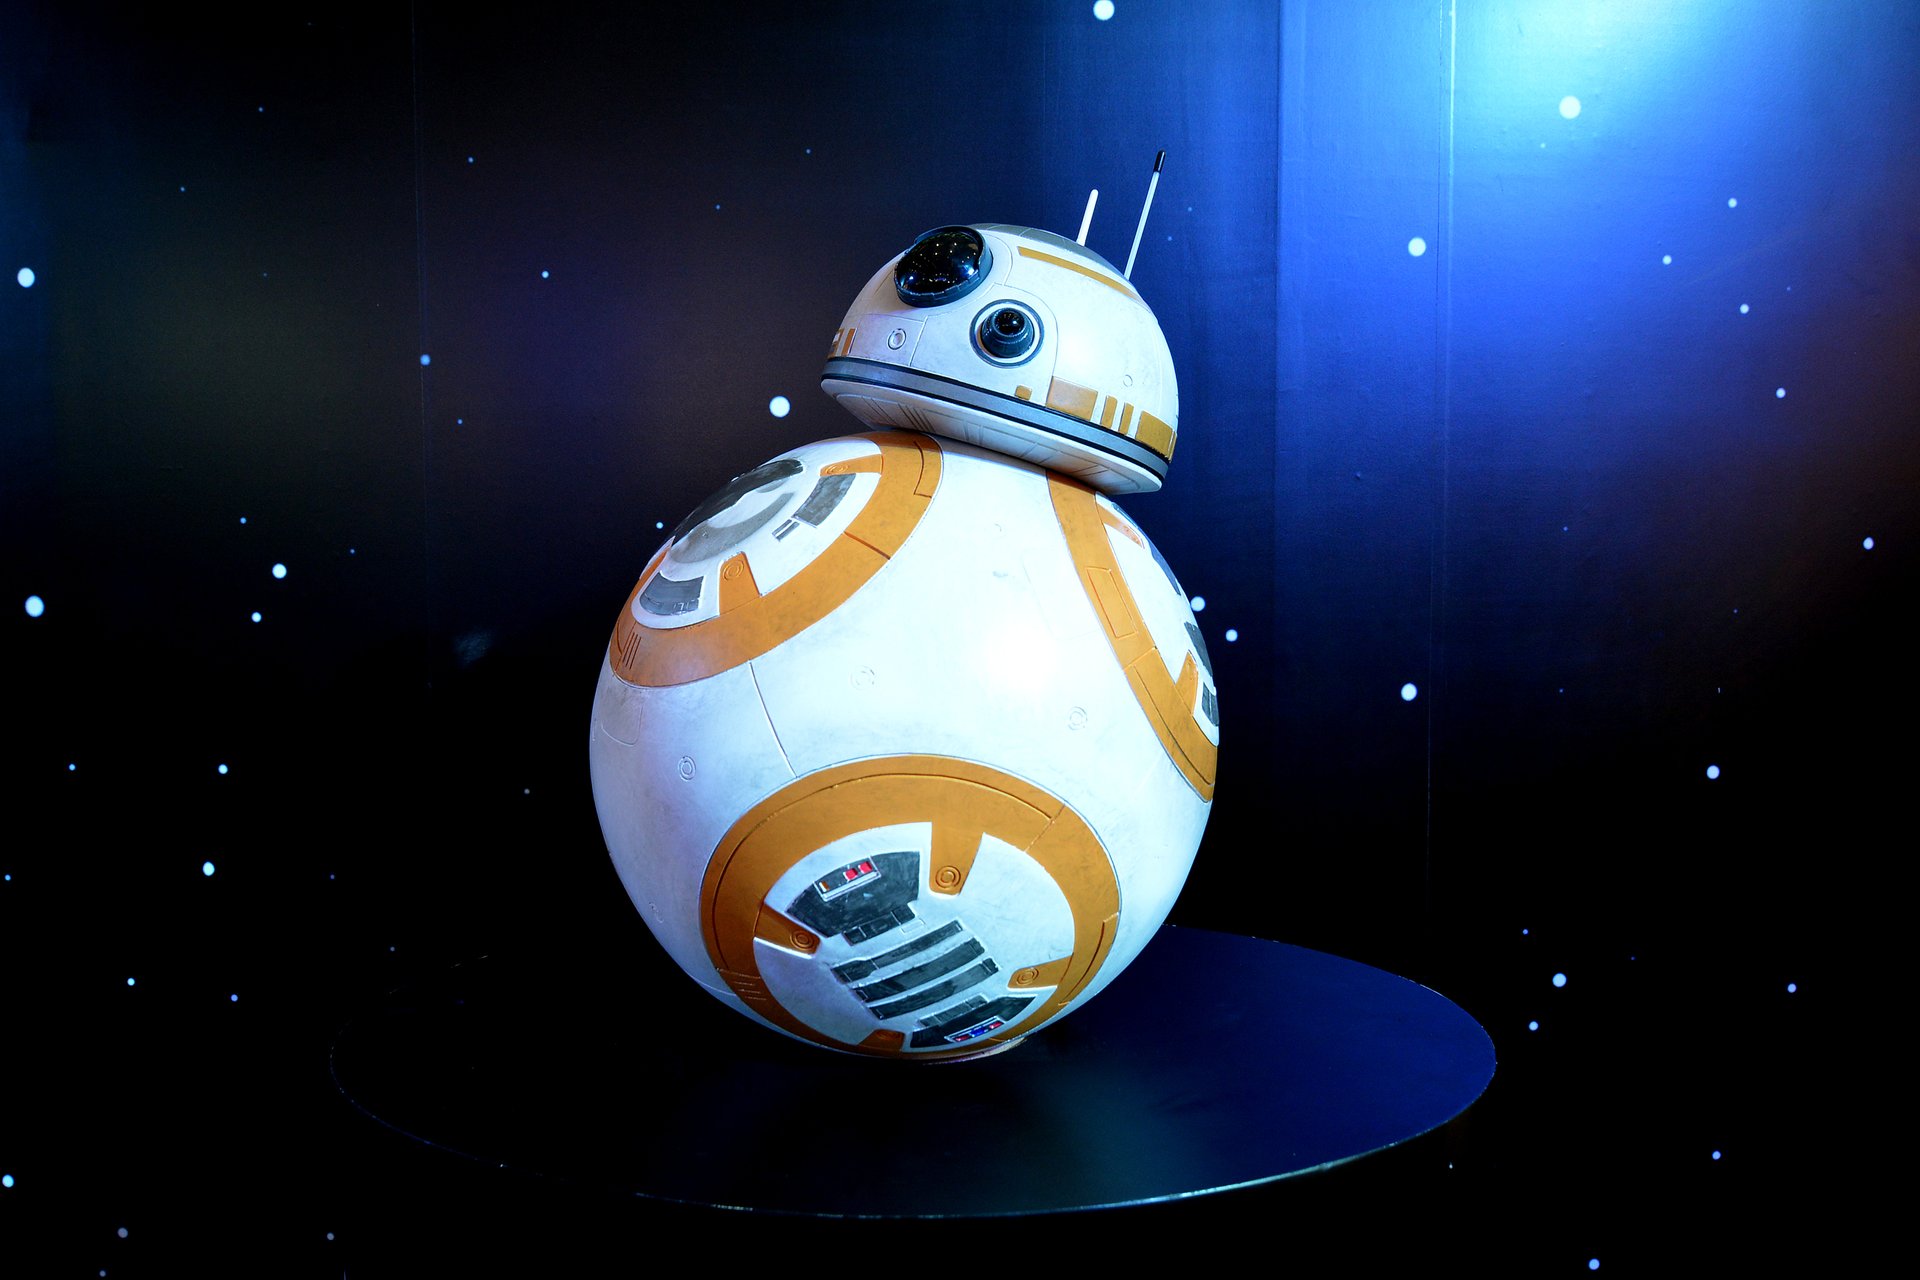 BB-8 droid from Star Wars